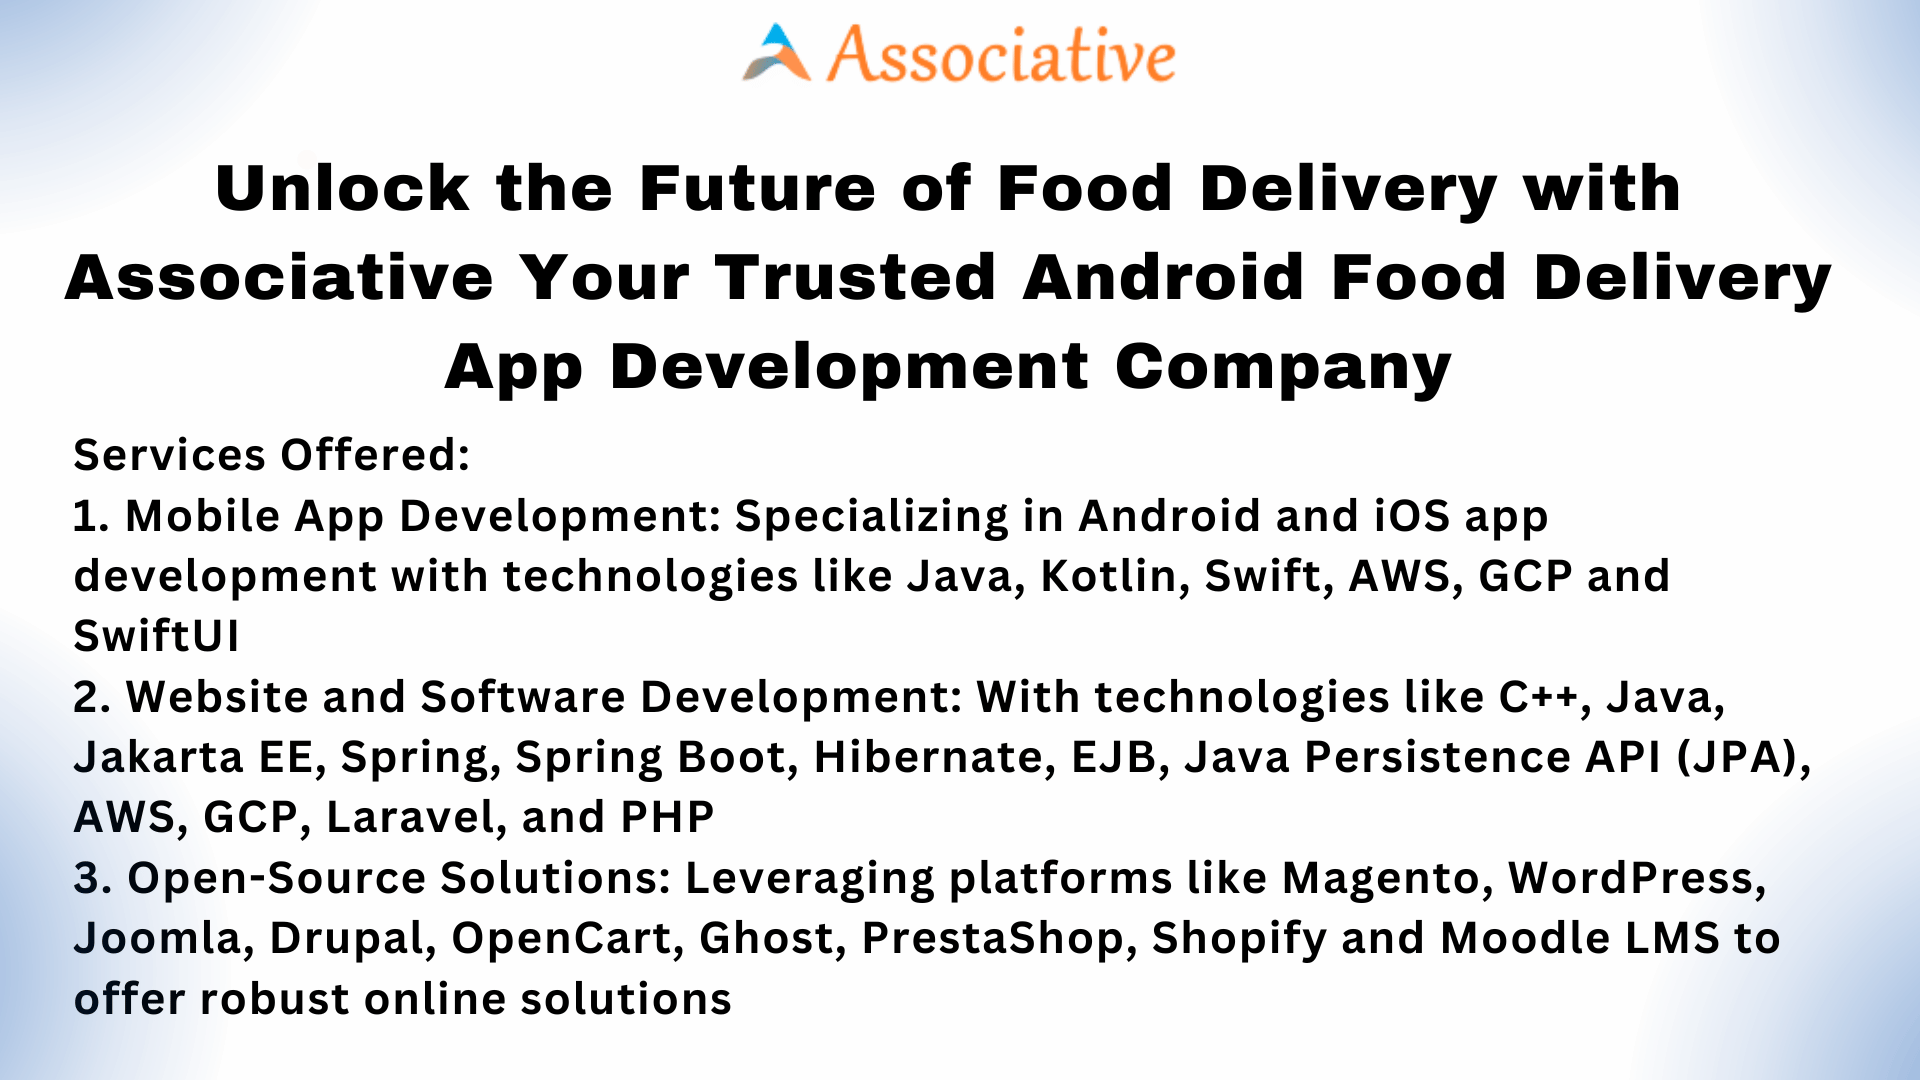 Unlock the Future of Food Delivery with Associative Your Trusted Android Food Delivery App Development Company